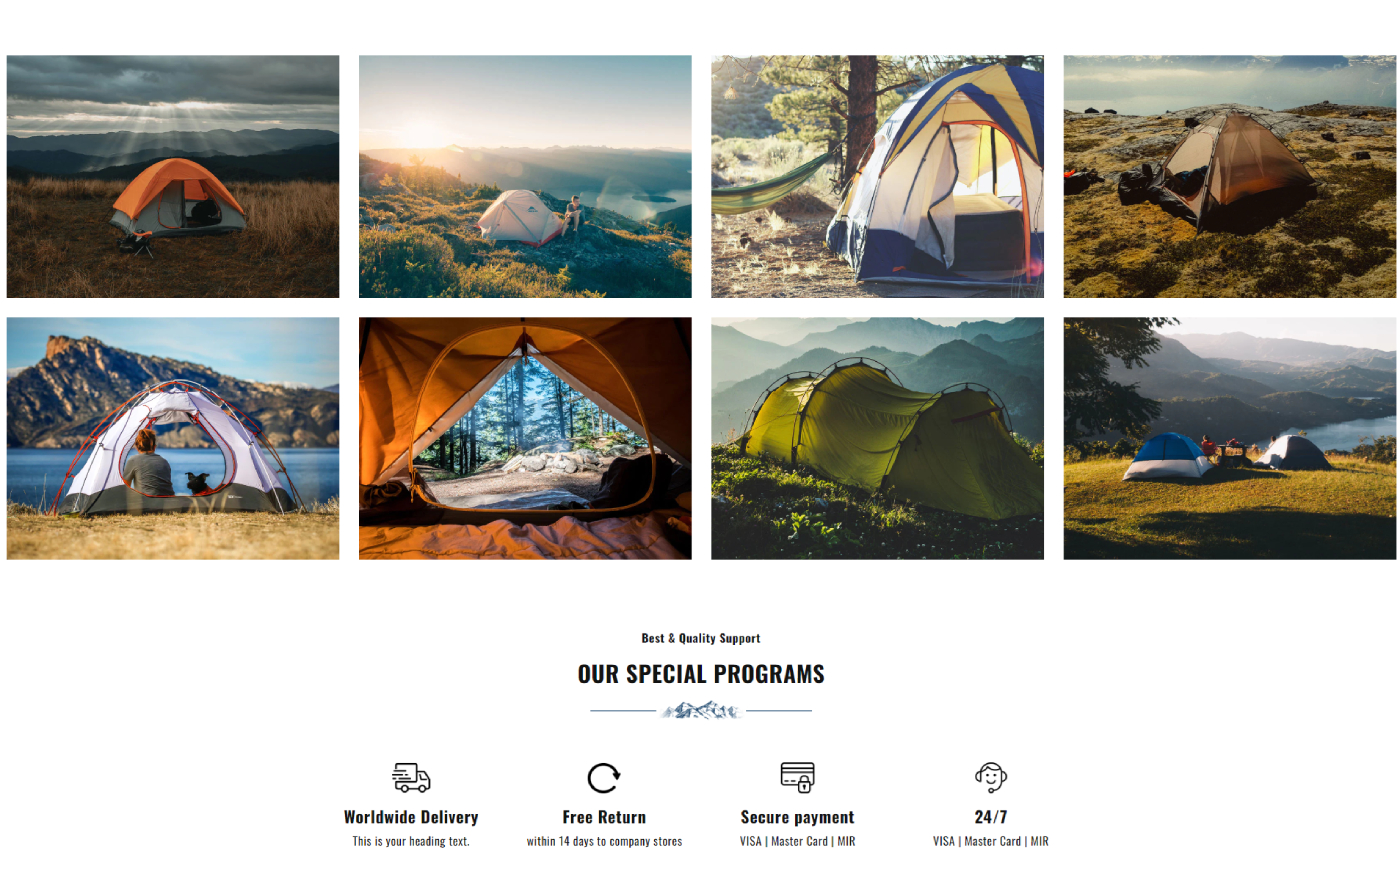 Campingify - Free Outdoor And Camping Shopify template built by Pagefly